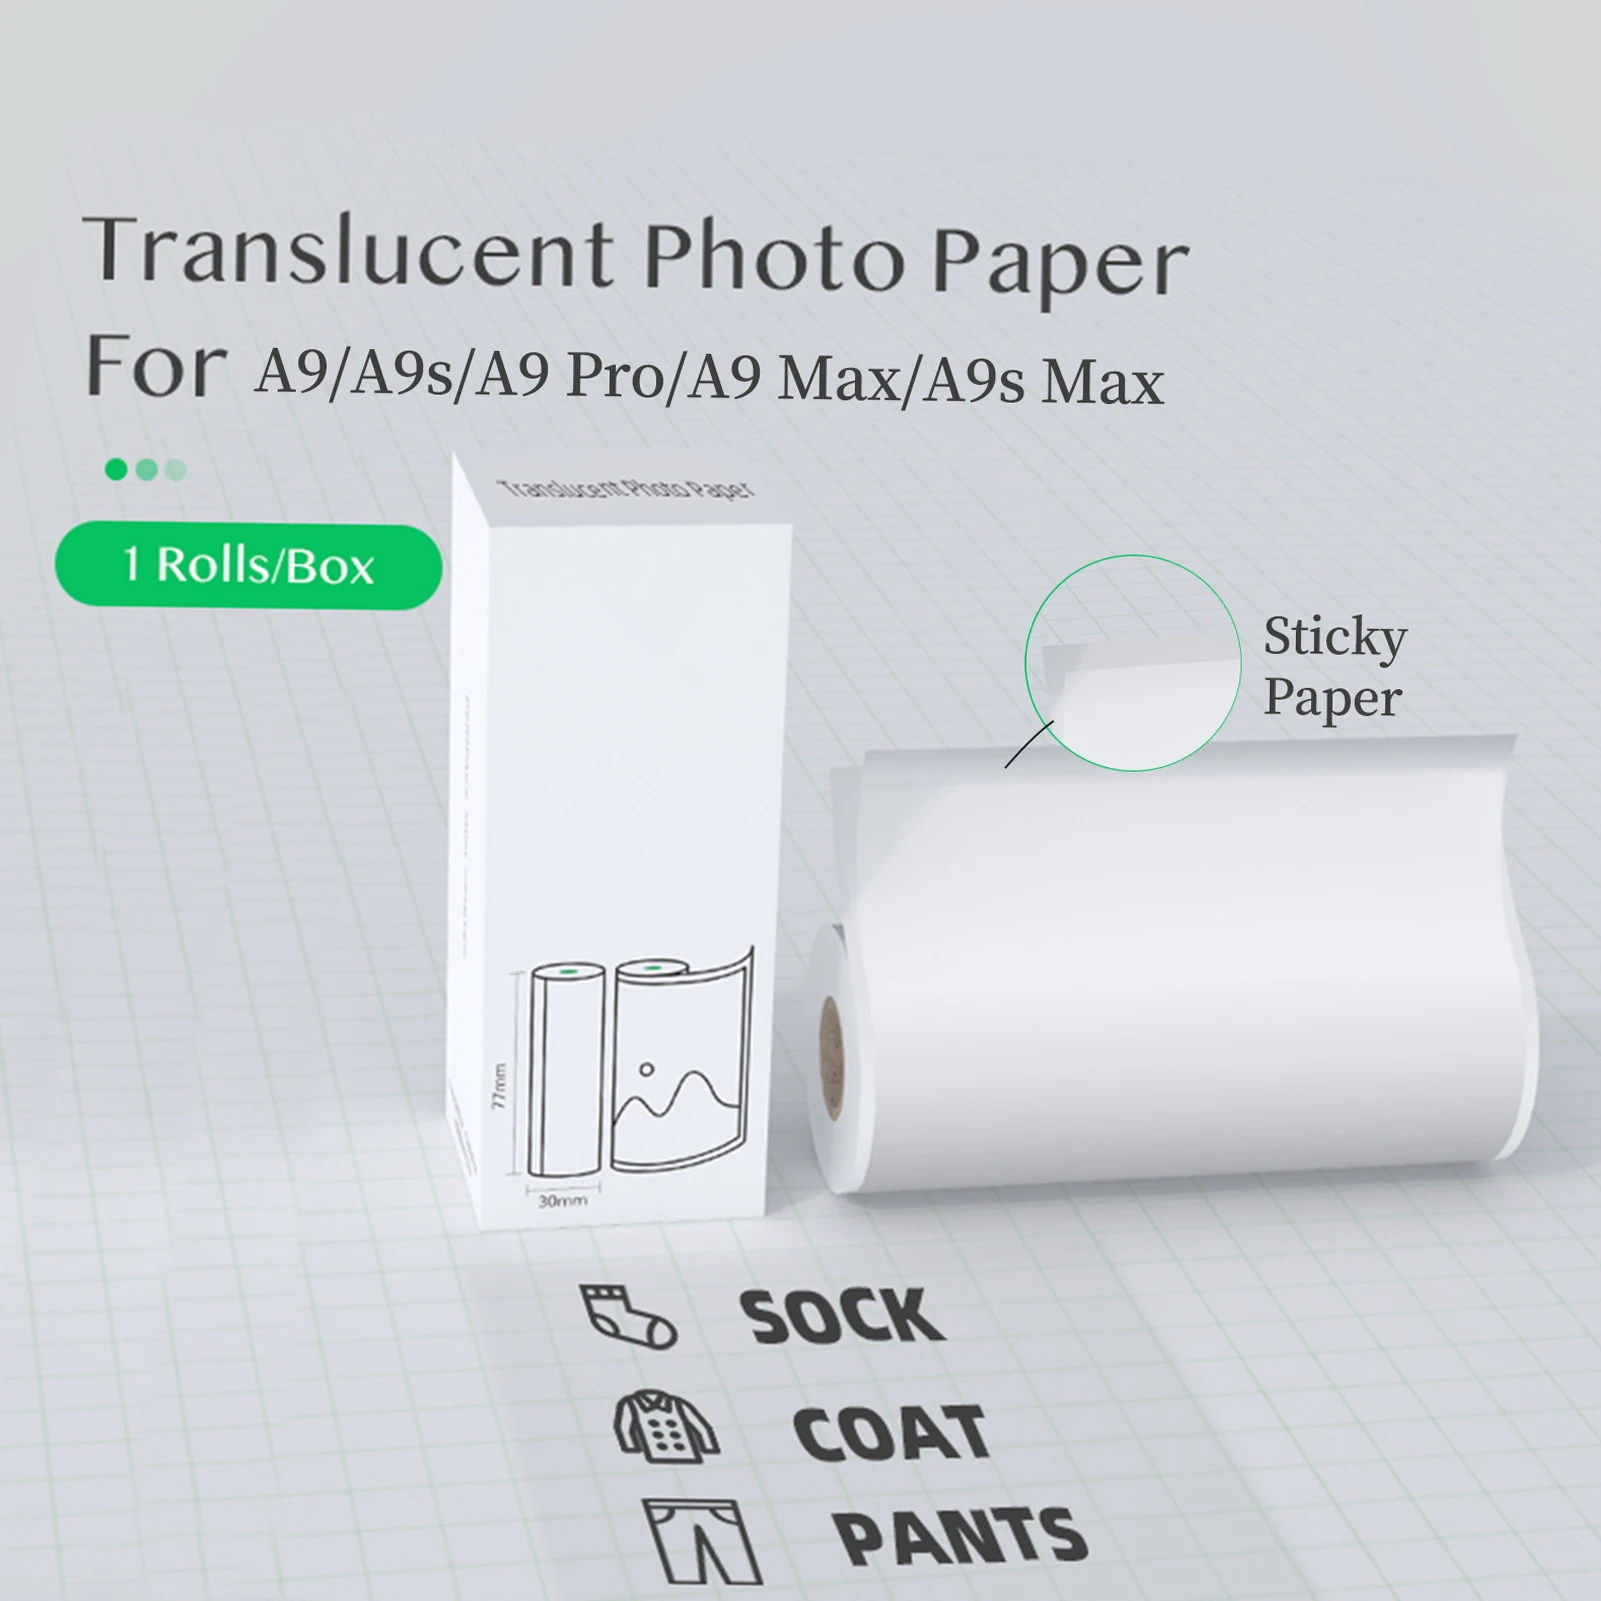 

PeriPage Translucent Photo Sticker BPA-Free Adhesive Thermal Paper Roll Sticky Paper Waterproof for PeriPage A6/A8/A9/A9s/A9 Pro